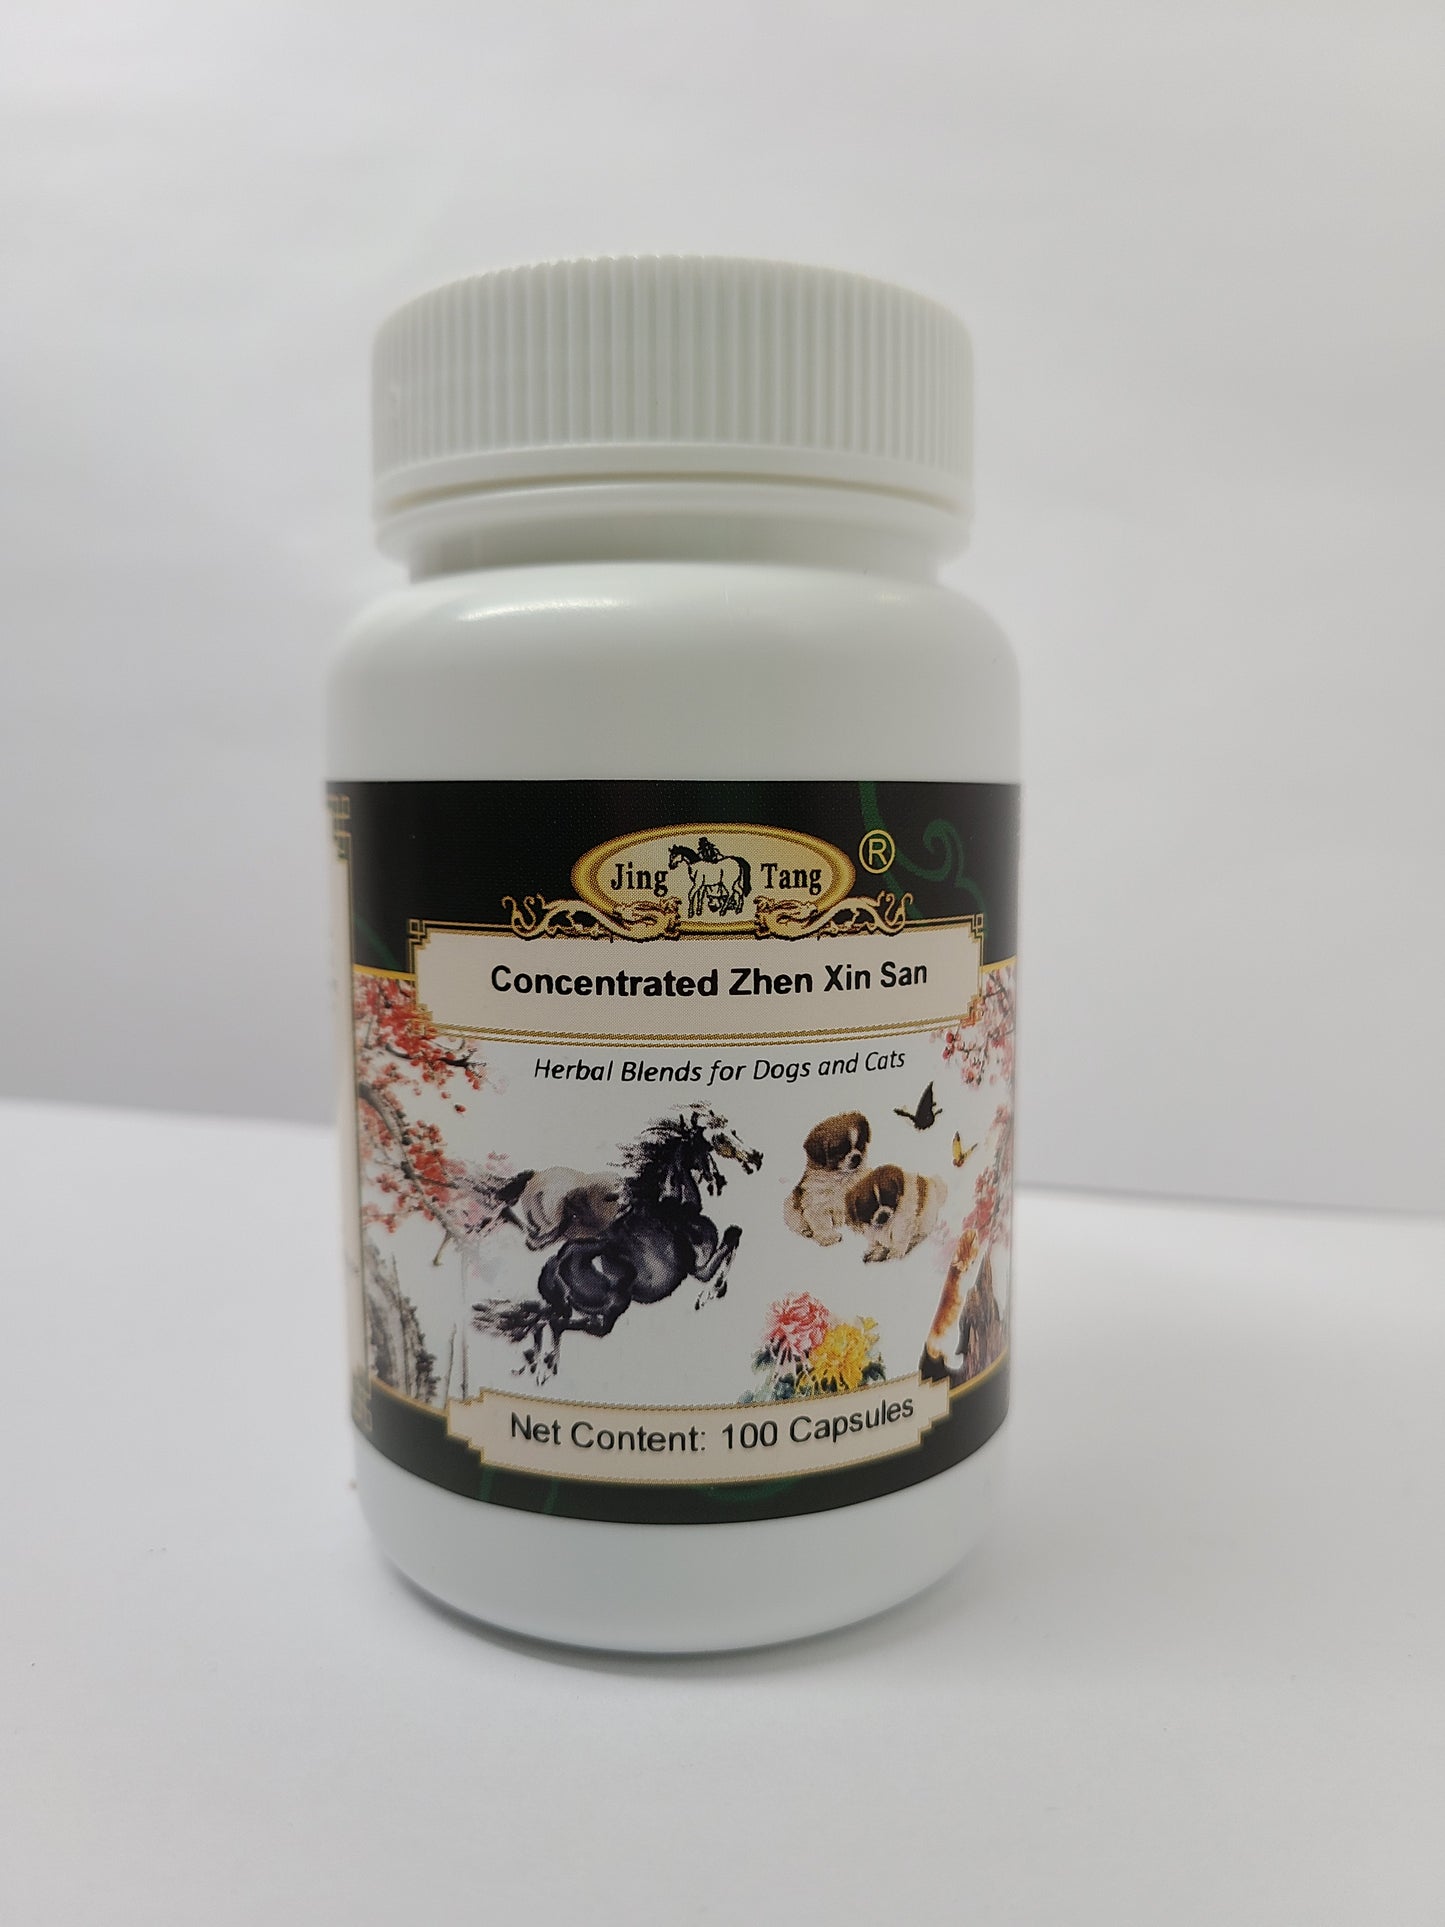 Jing Tang Herbals: Concentrated Zhen Xin San 0.5g capsule (100 capsule bottle)